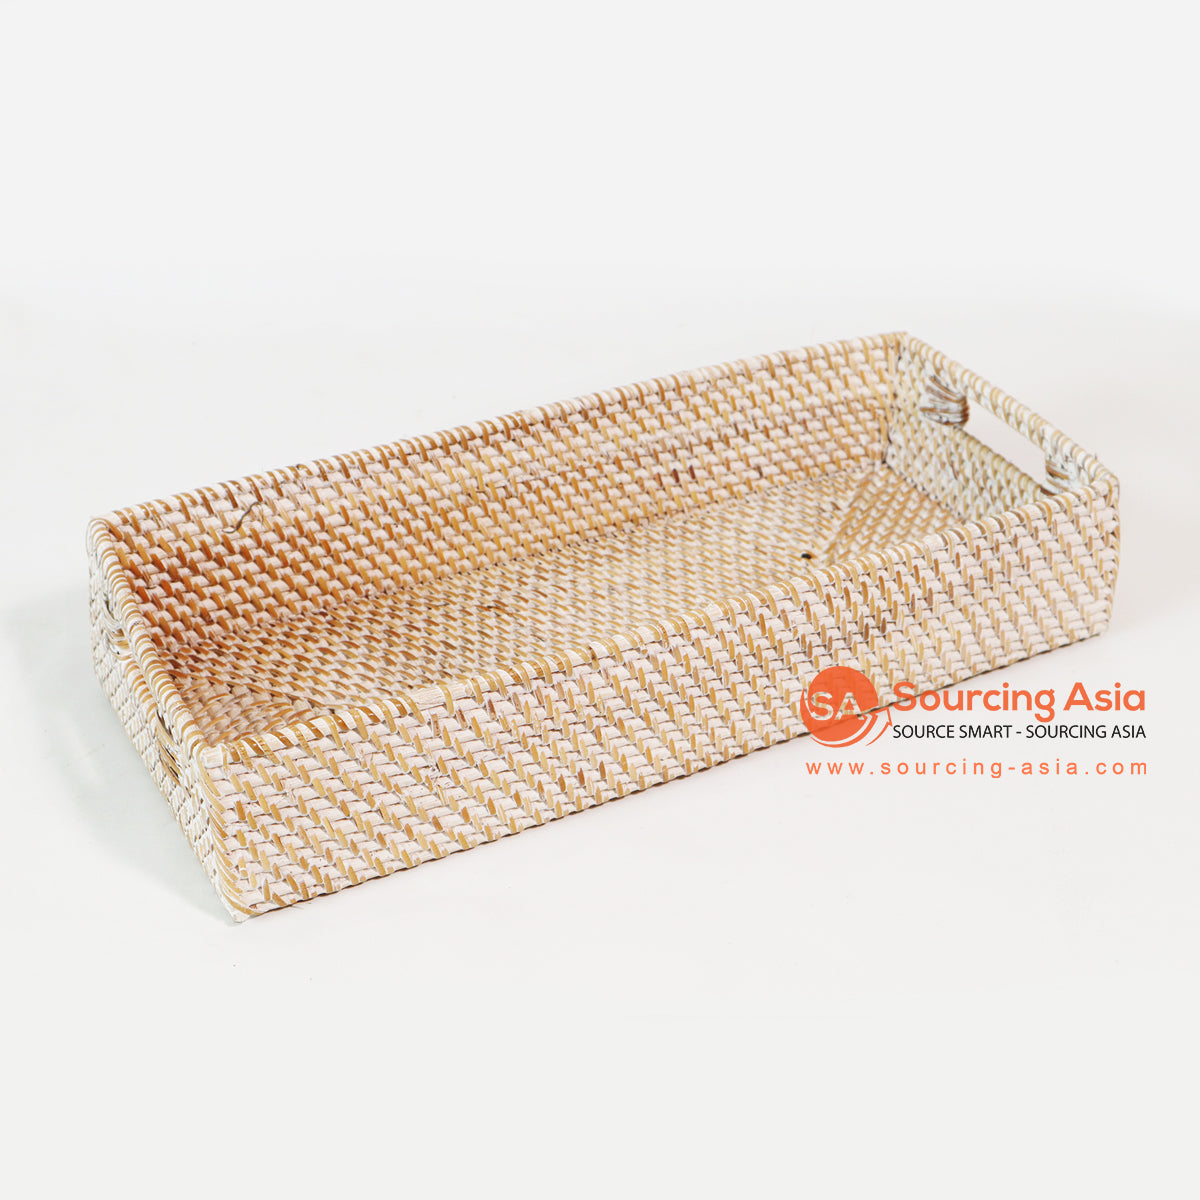 MTIC026 WHITE WASH WOVEN RATTAN RECTANGULAR TRAY WITH HANDLE